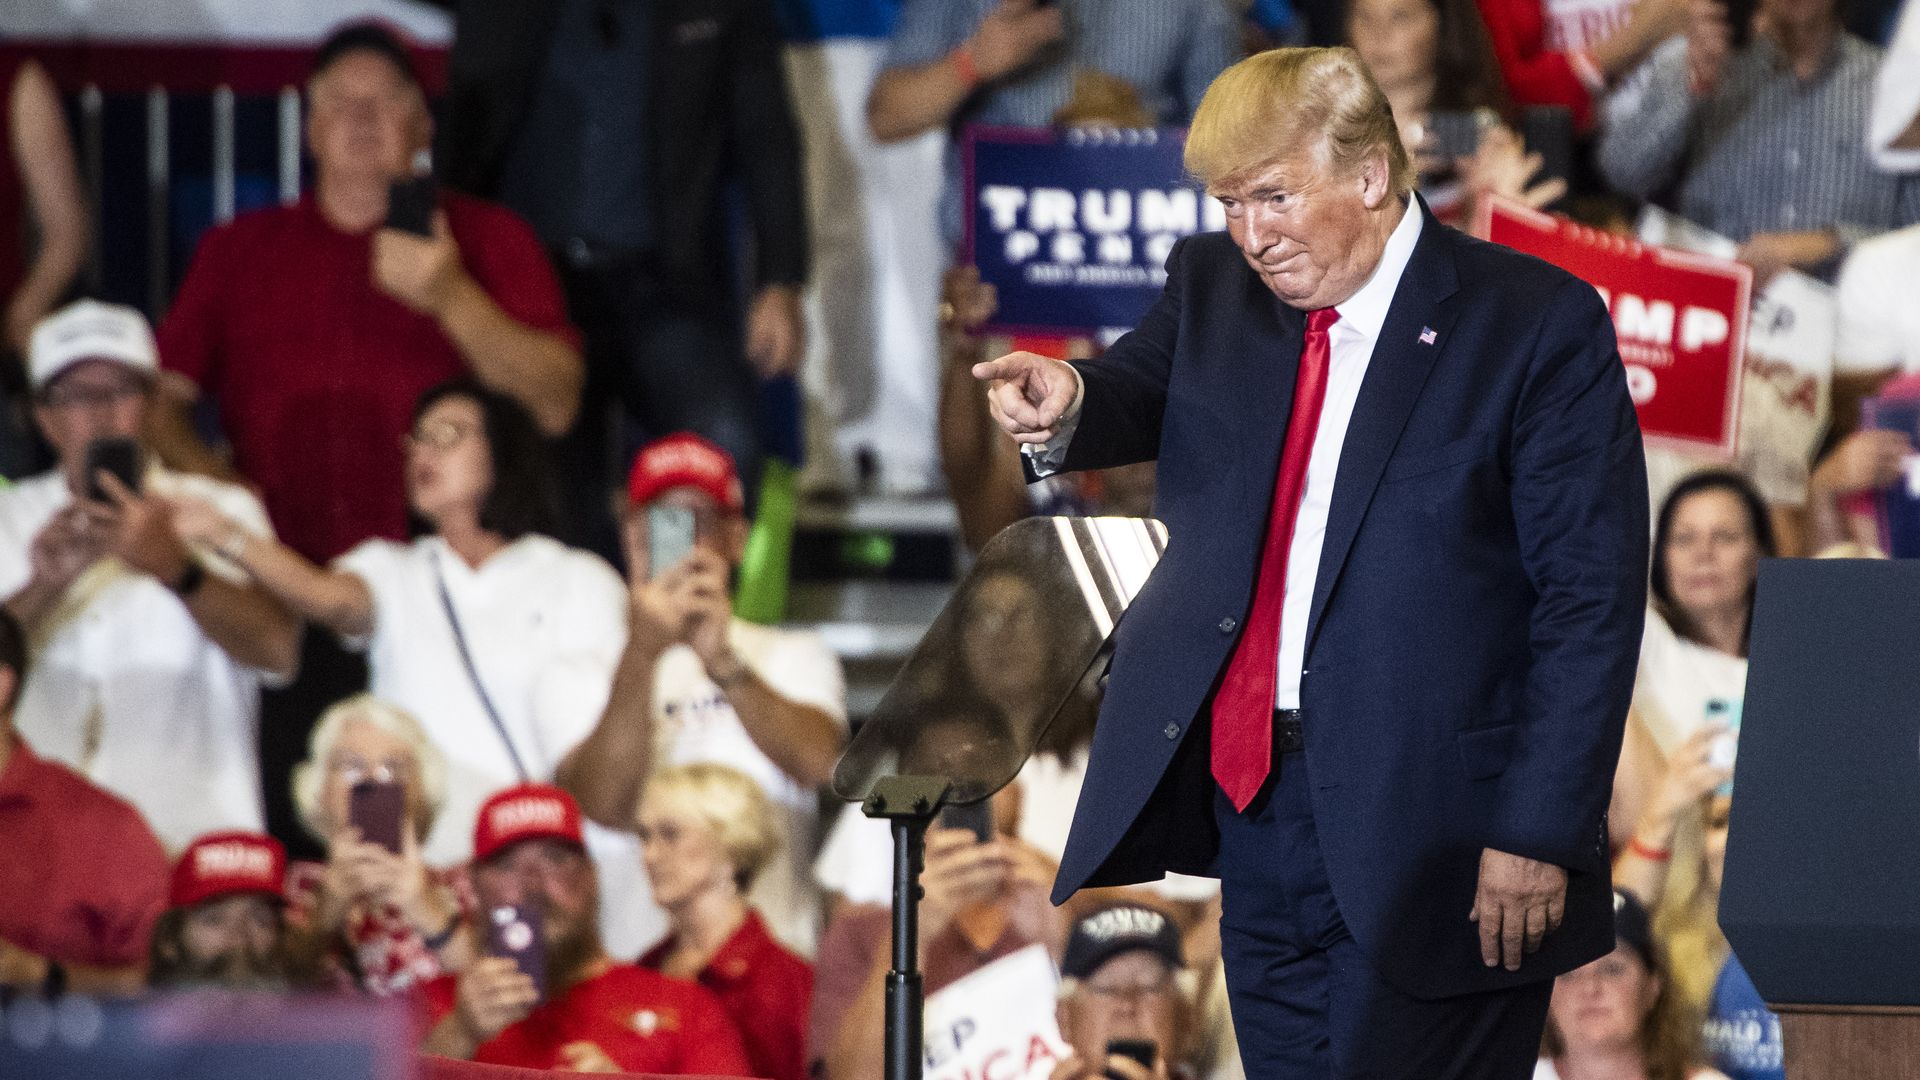 In this image, Trump points at a MAGA rally attendee 